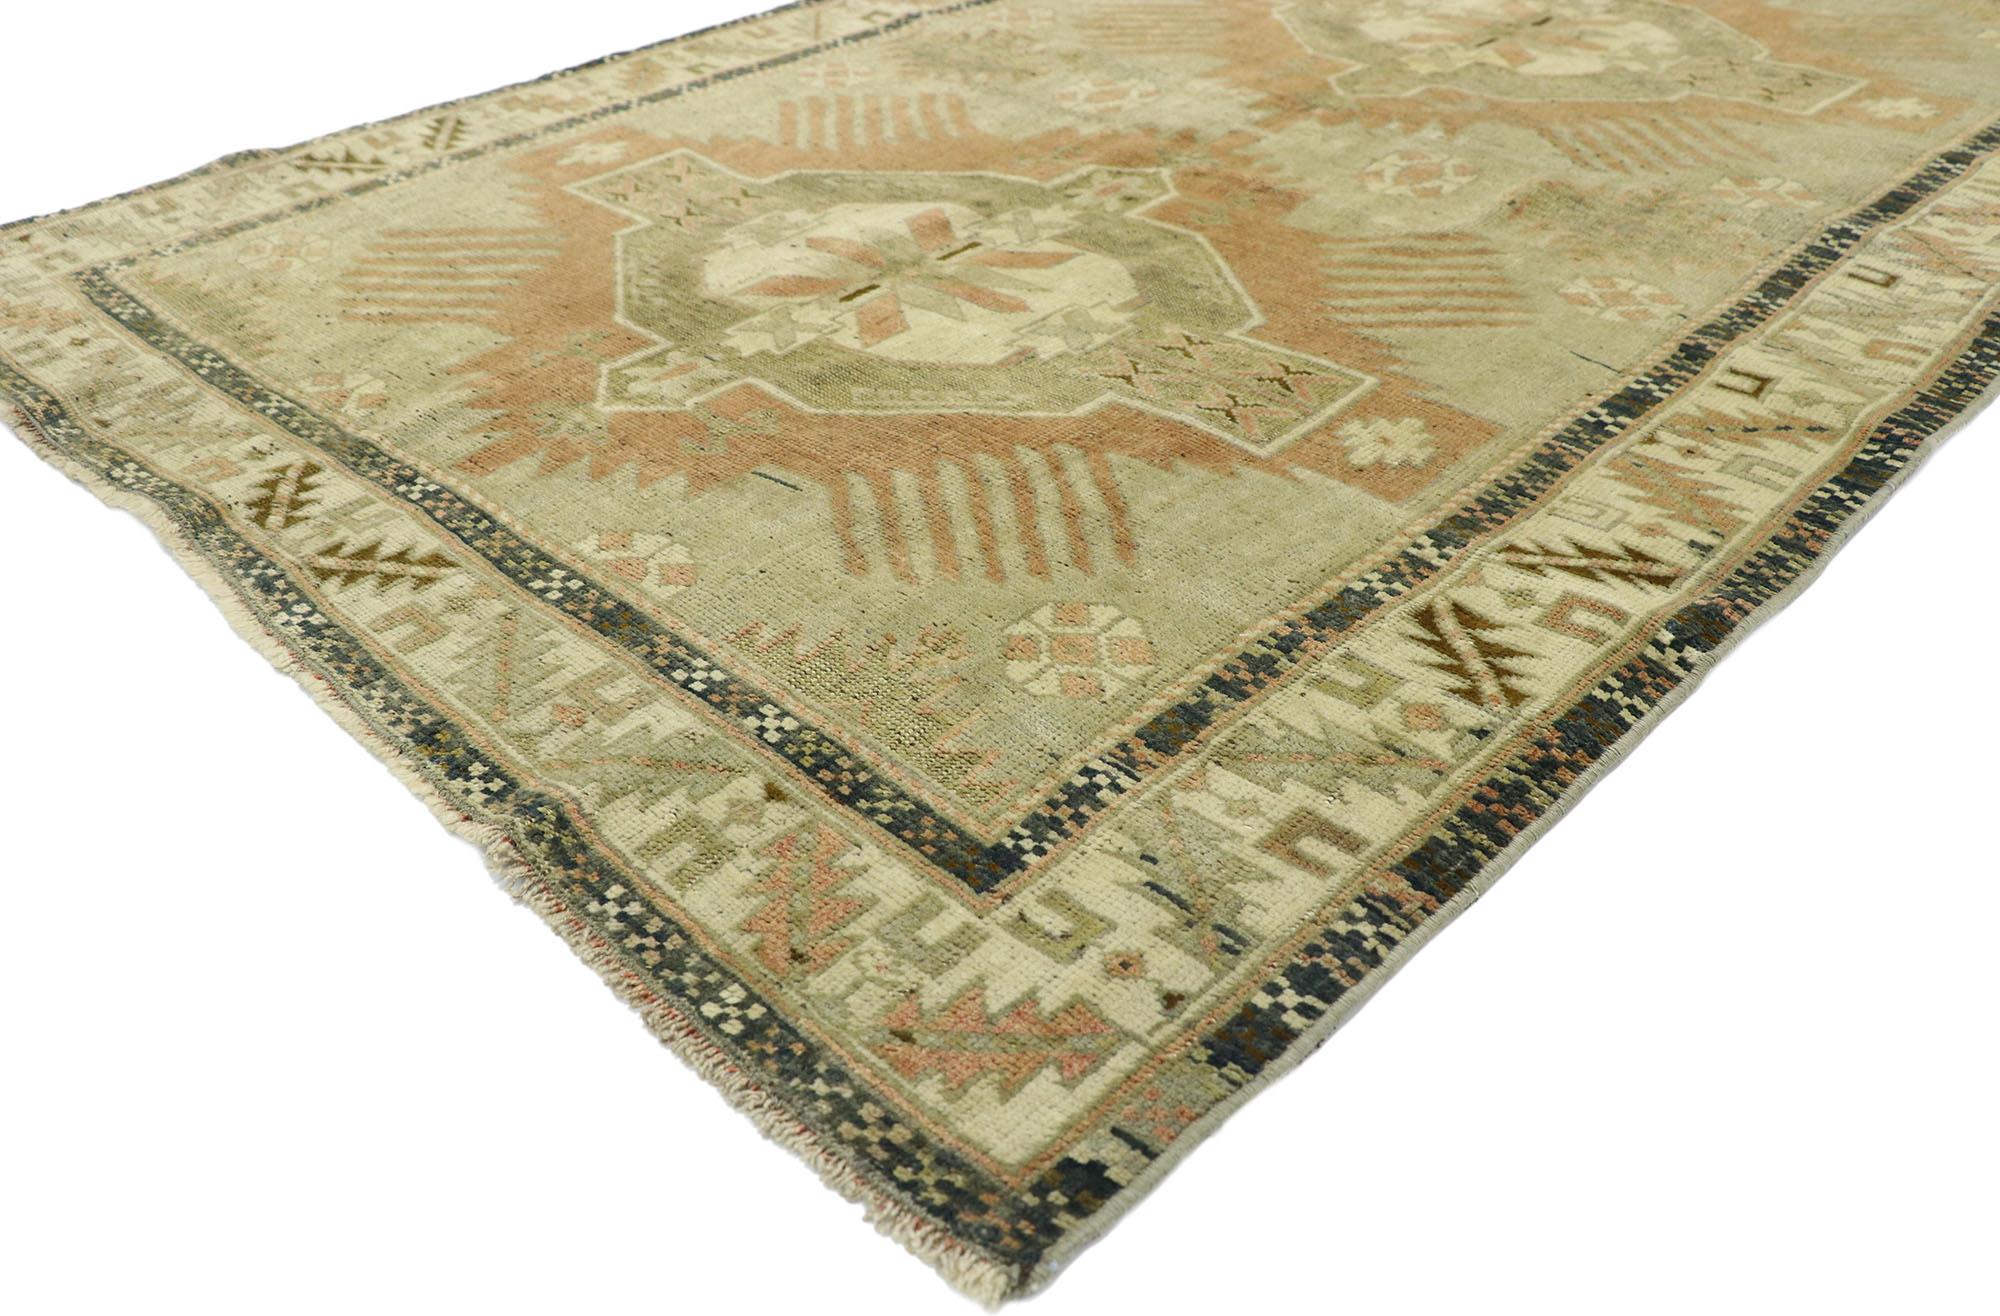 52726, vintage Turkish Oushak rug with rustic Belgian style 03'11 x 06'02. Highlighting modern design aesthetics and understated elegance with subdued color, this hand knotted wool antique Turkish Oushak rug beautifully embodies rustic Belgian